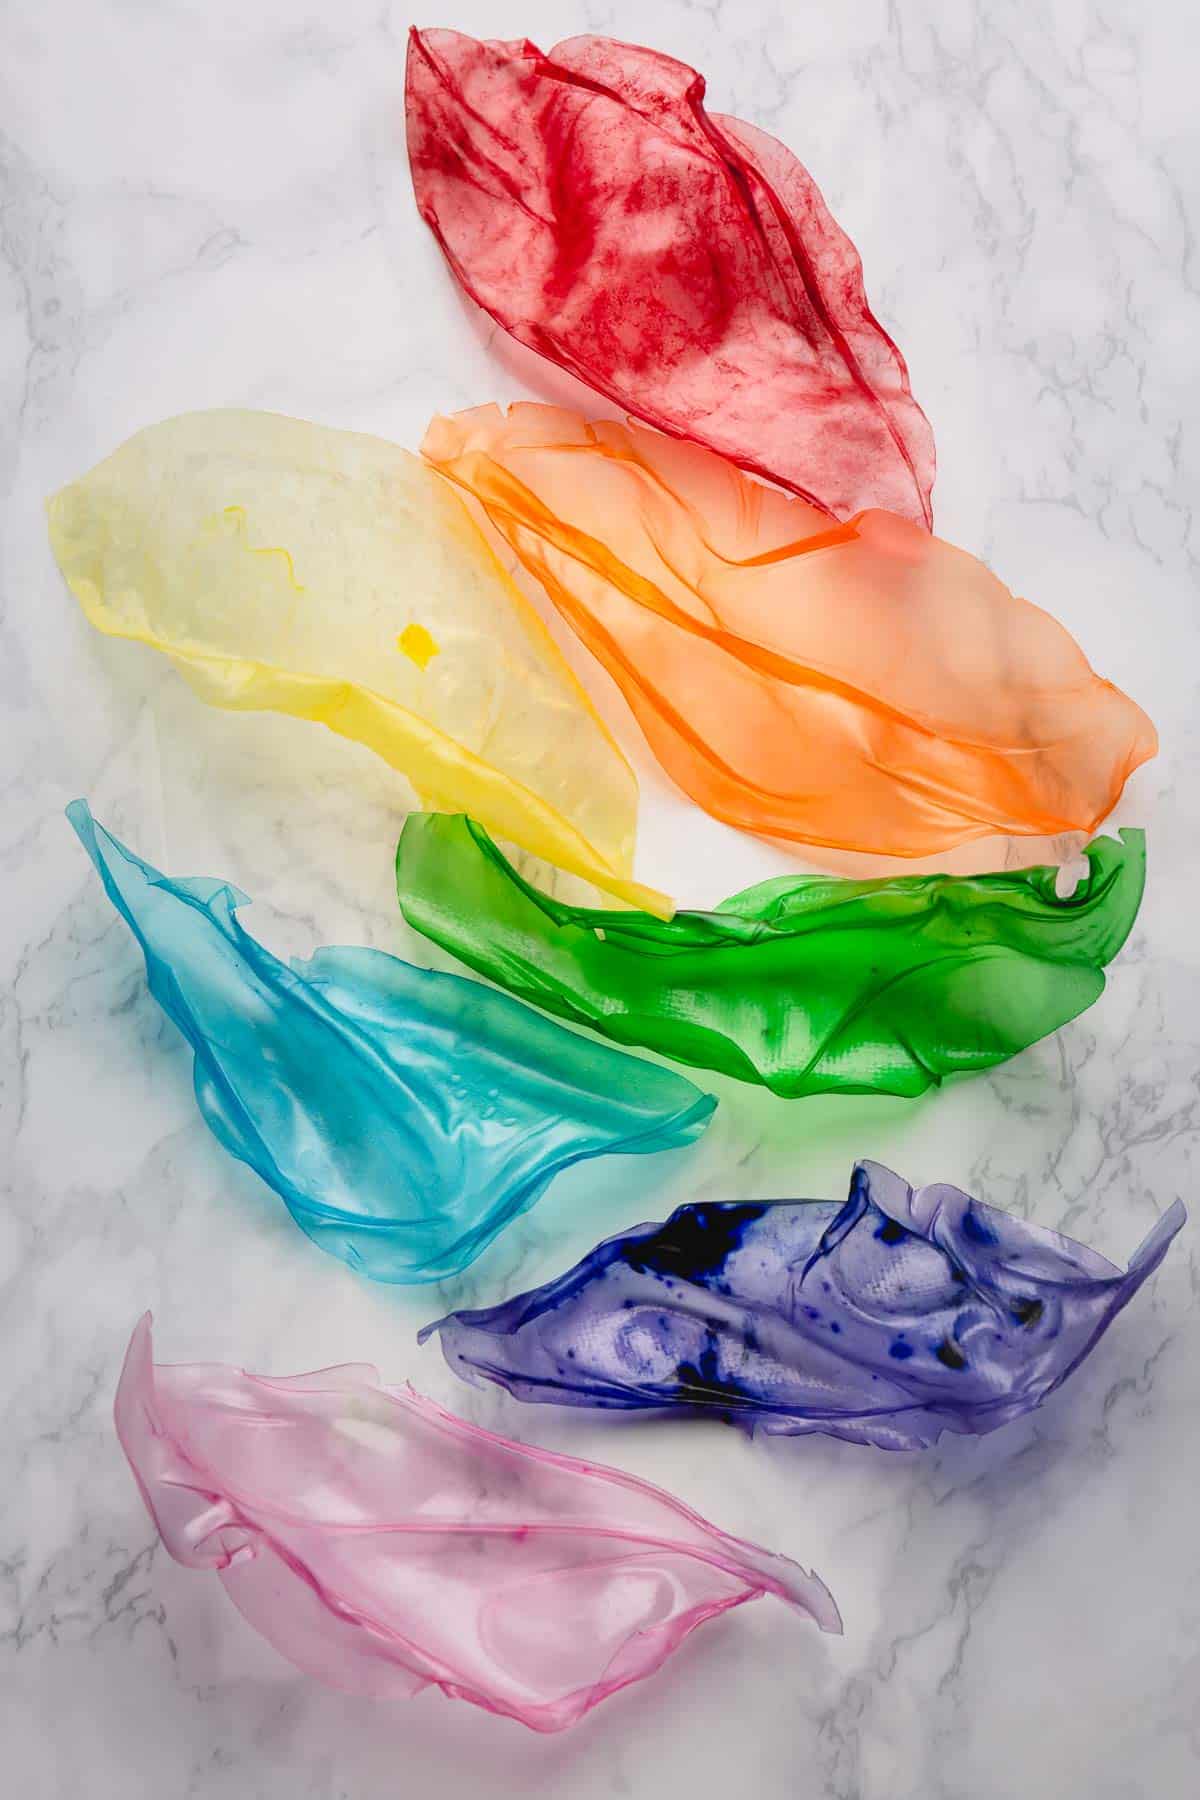 7 rice paper sails of rainbow colors on the counter